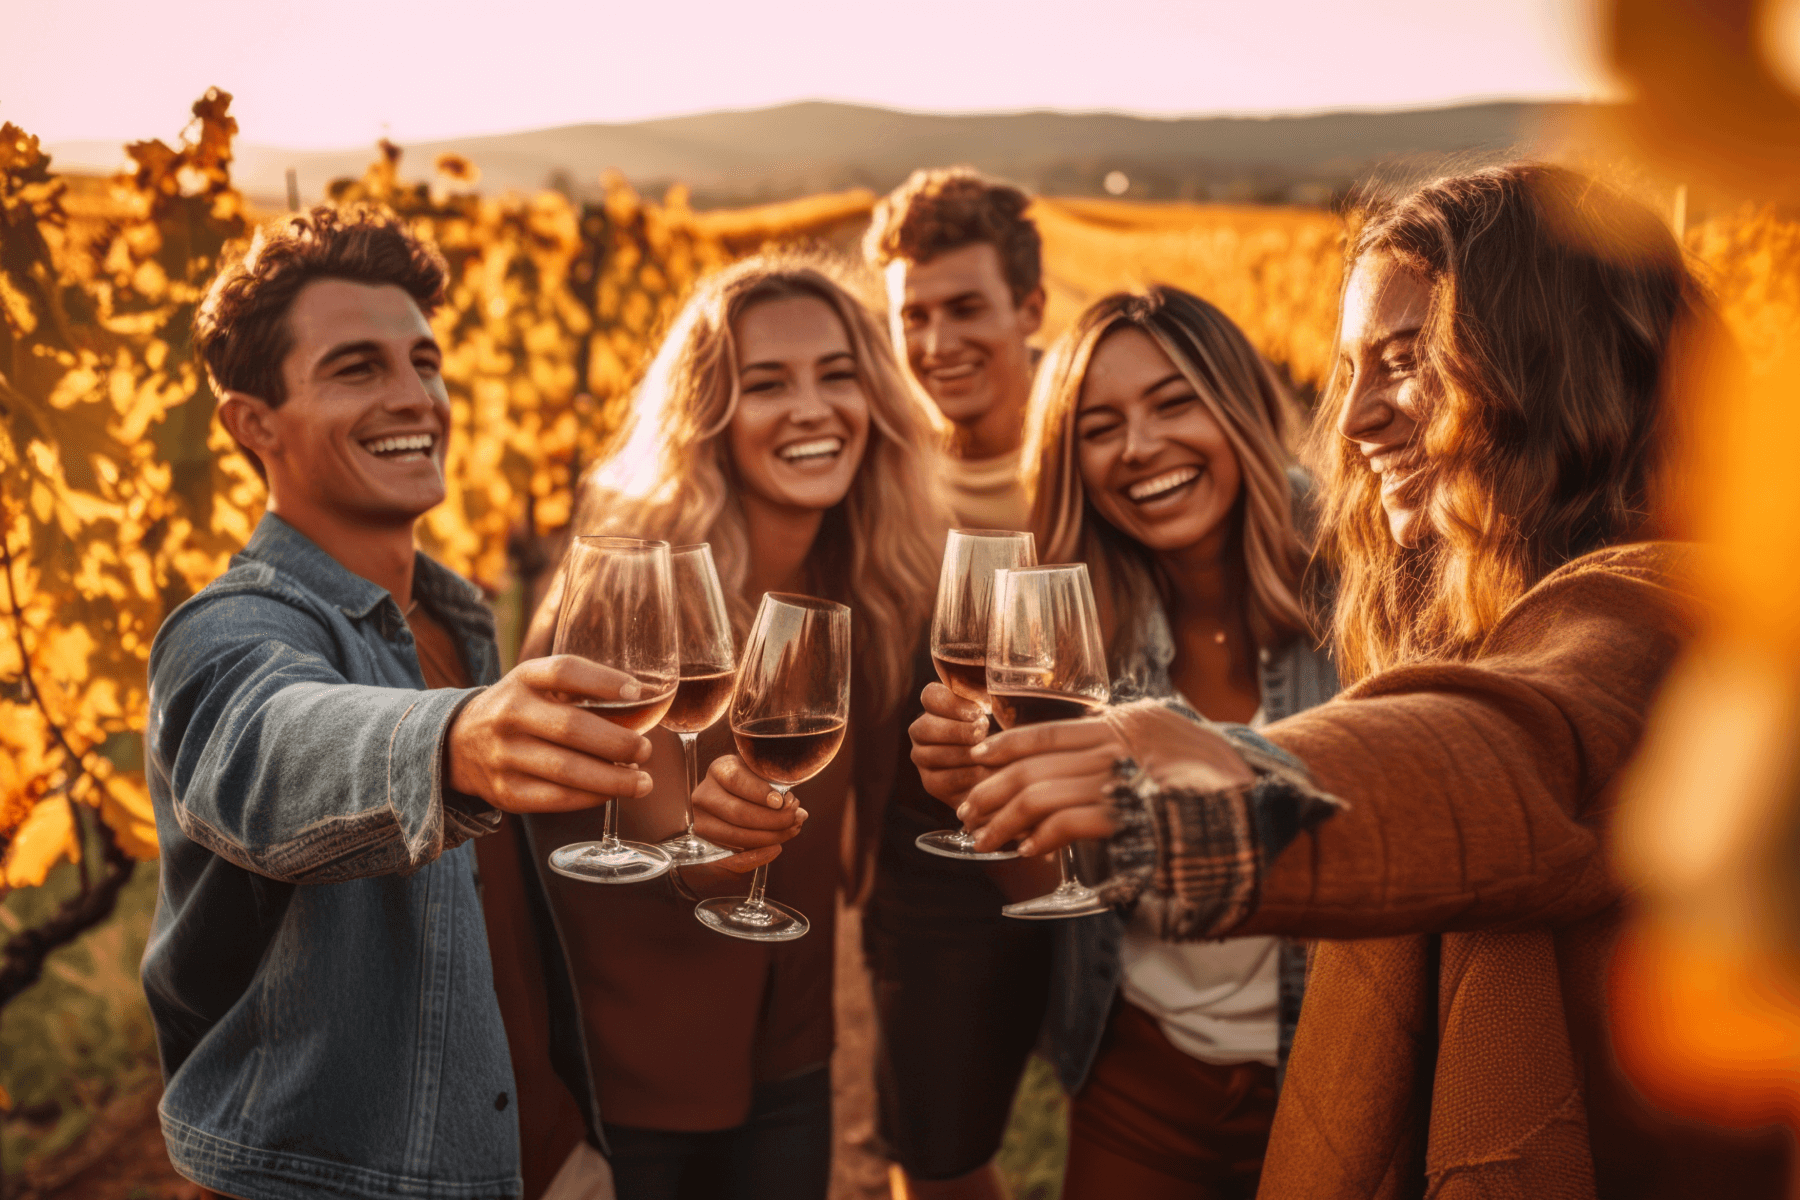 Five friends clicking glasses of wine in a beautiful fall vineyard setting.